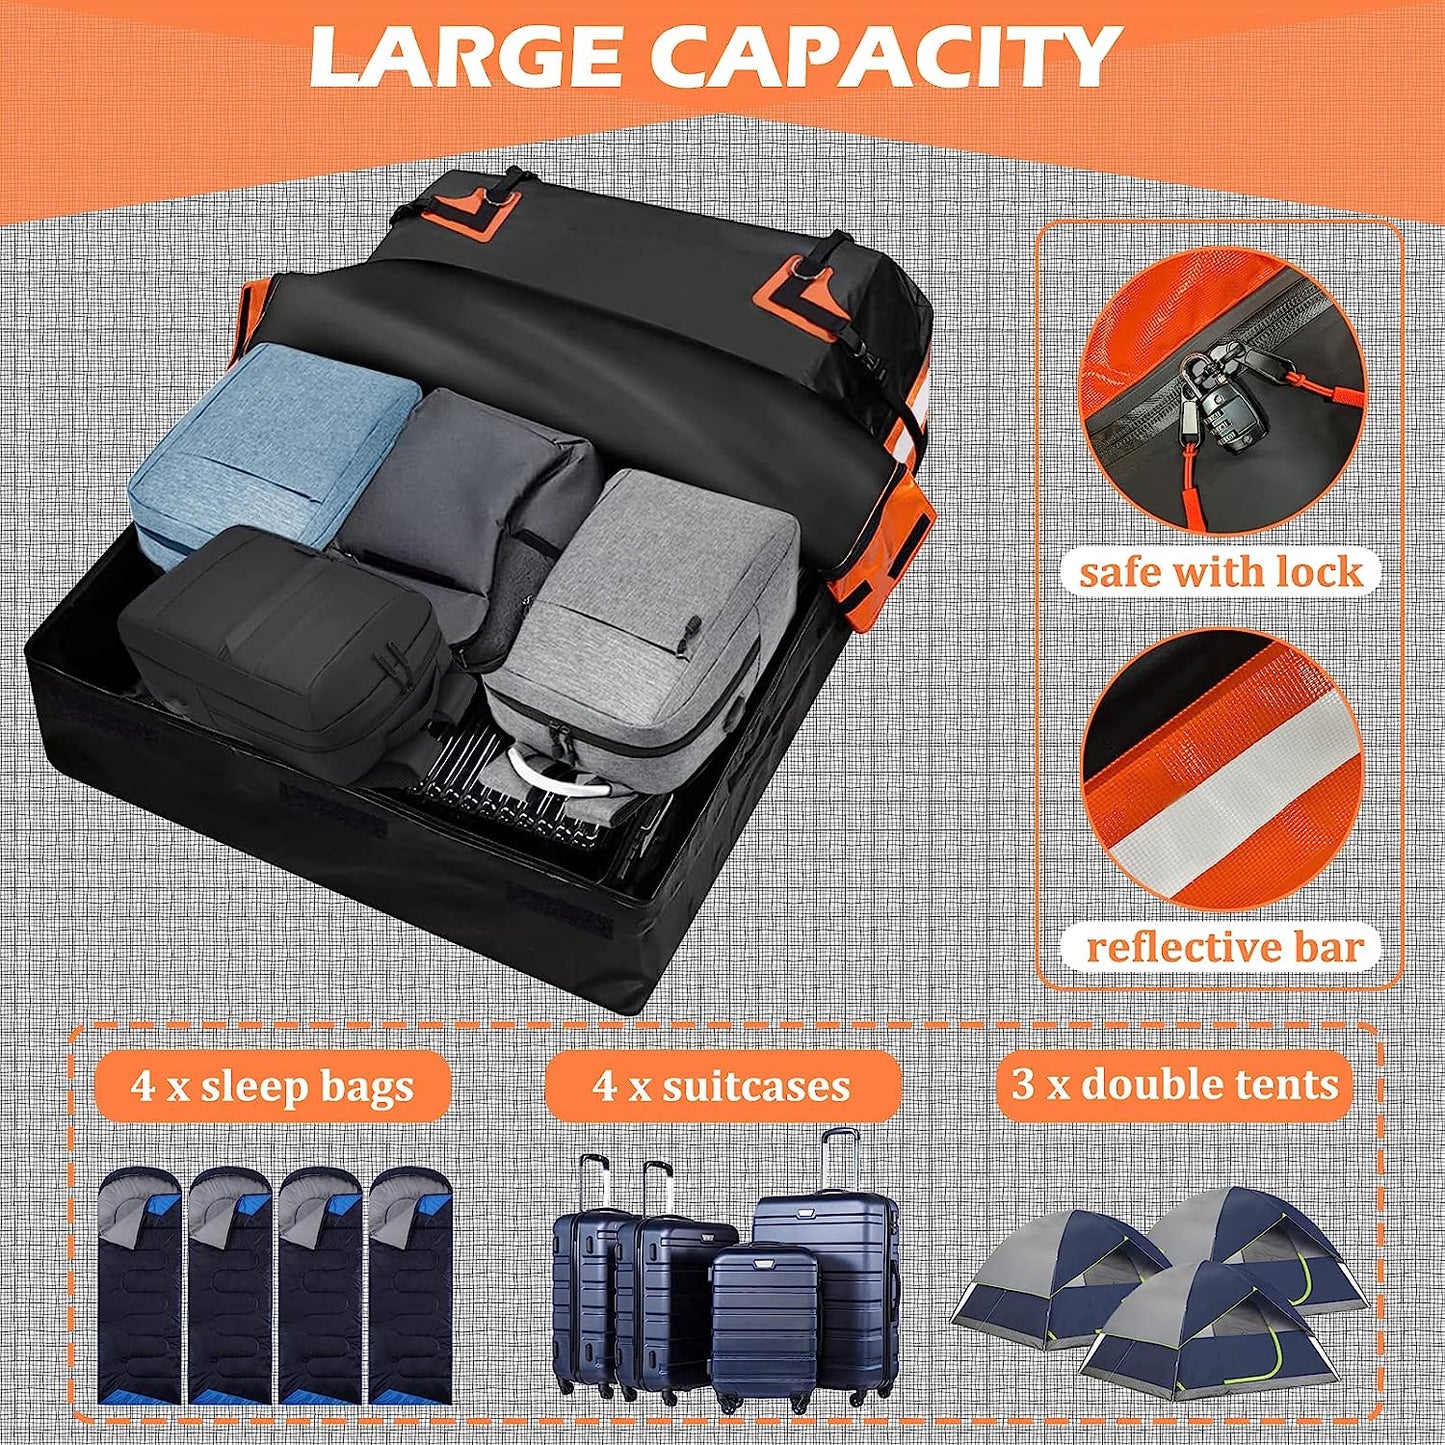 Big Ant Car Rooftop Cargo Carrier Bag 20 Cubic Feet Fit for All Vehicle with/without Rack Bar